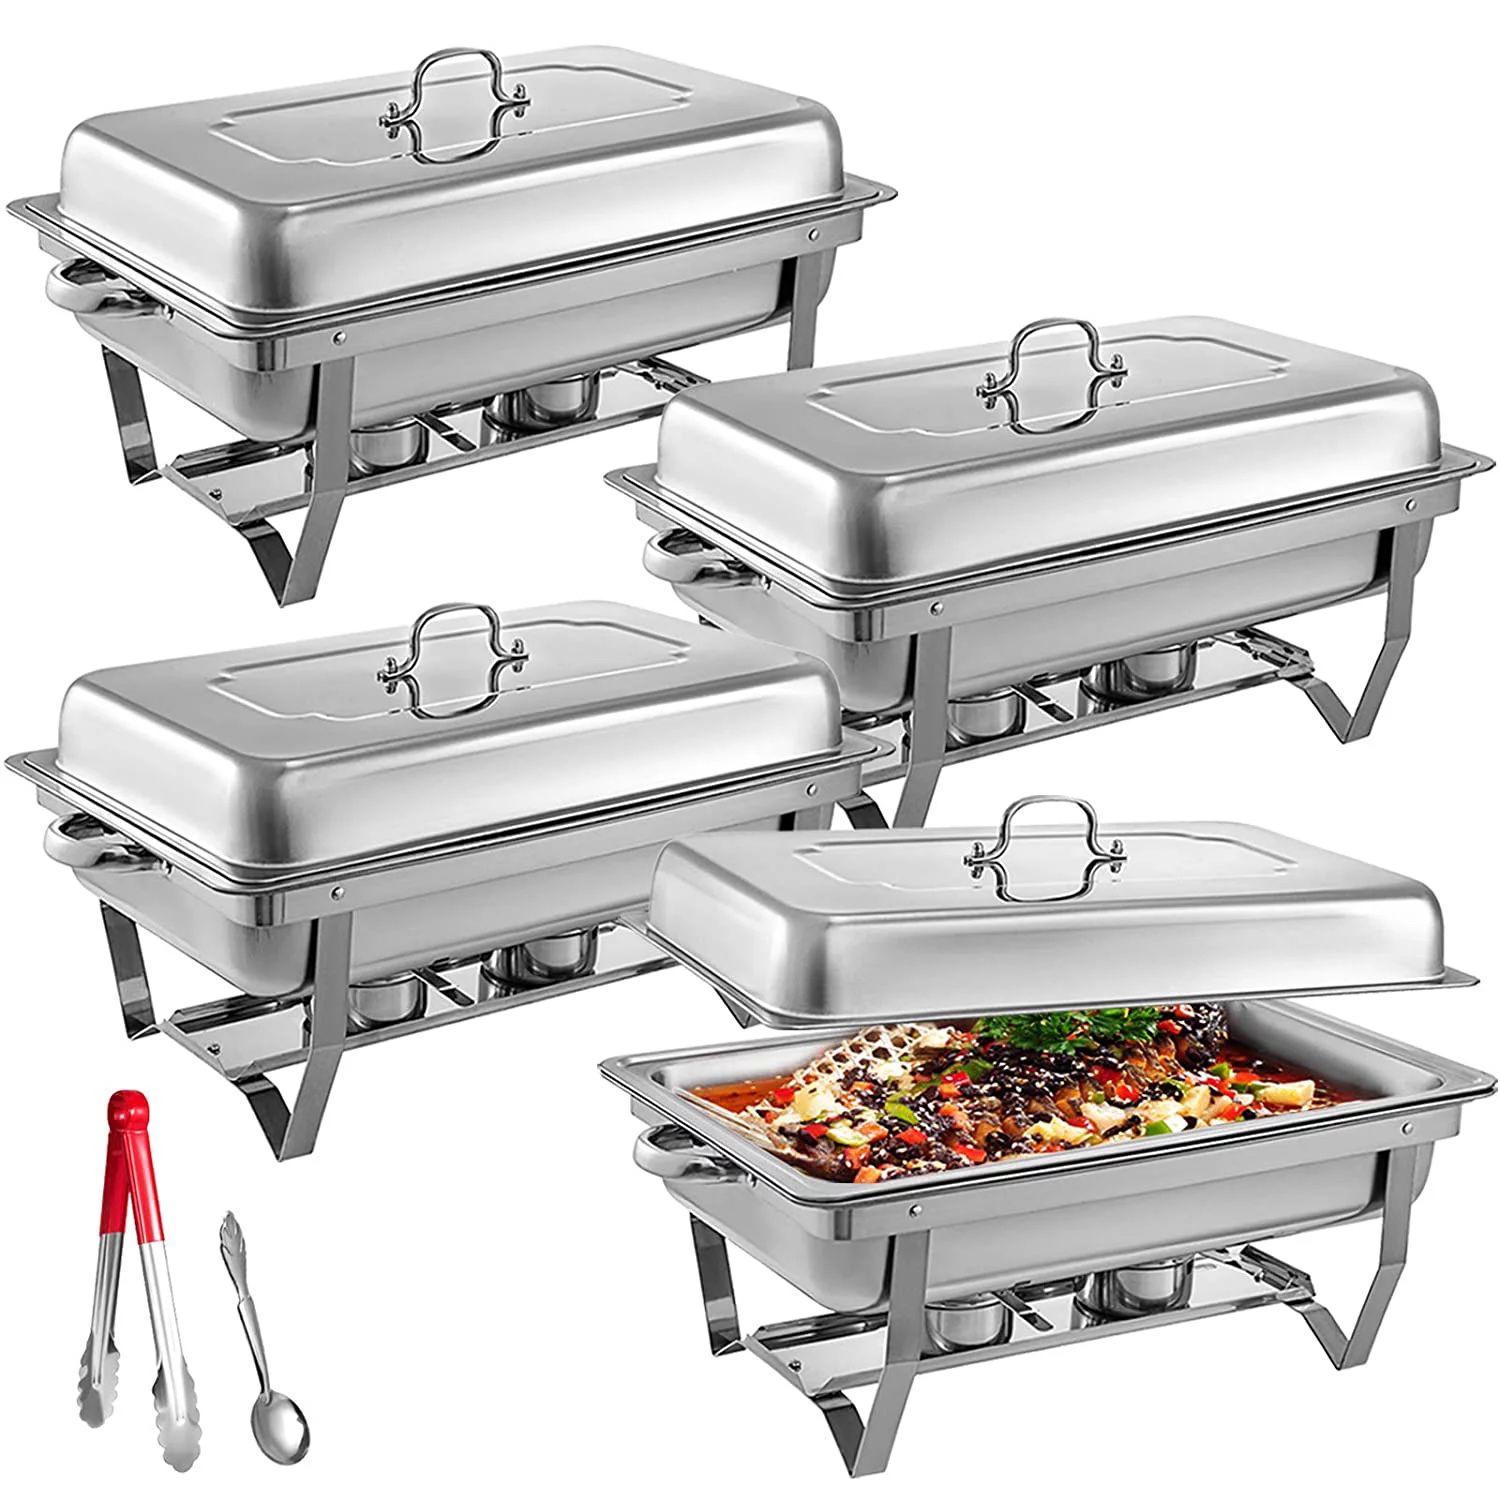 VEVORbrand Chafing Dish 4 Packs 9L/8 Quart Stainless Steel Chafer Full Size Rectangular Chafers for Catering Buffet Warmer Set with Folding Frame Silv